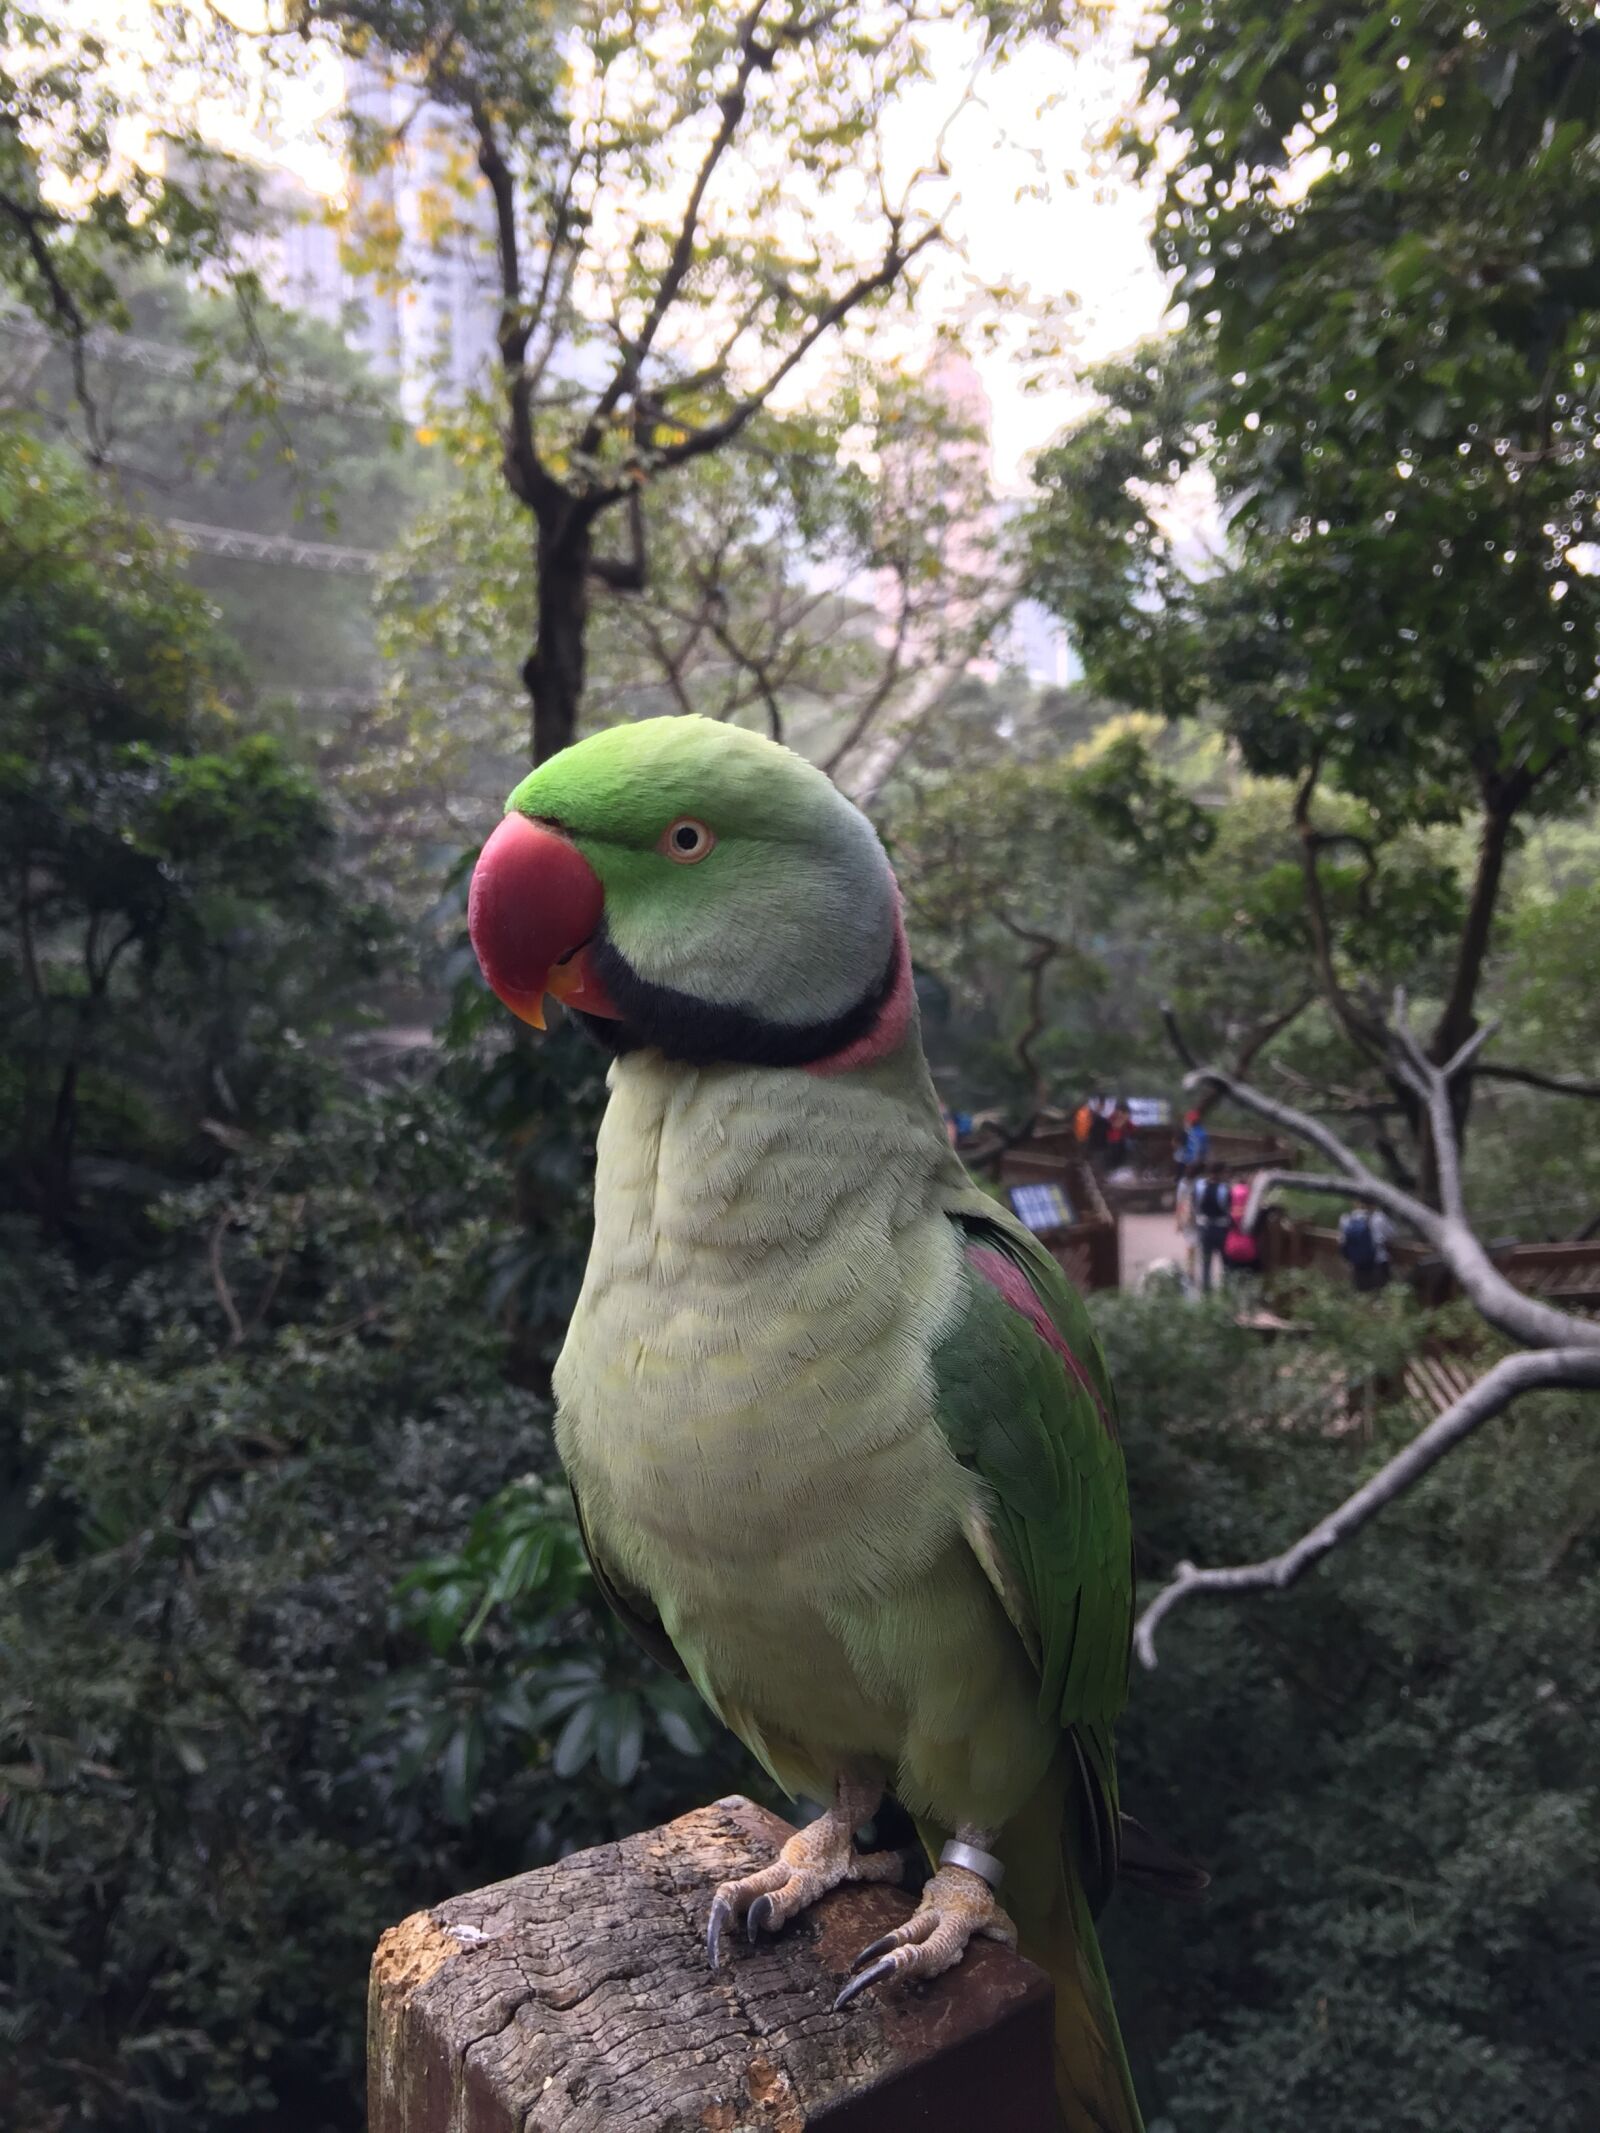 iPhone 6 Plus back camera 4.15mm f/2.2 sample photo. Parrot, bird, nature photography